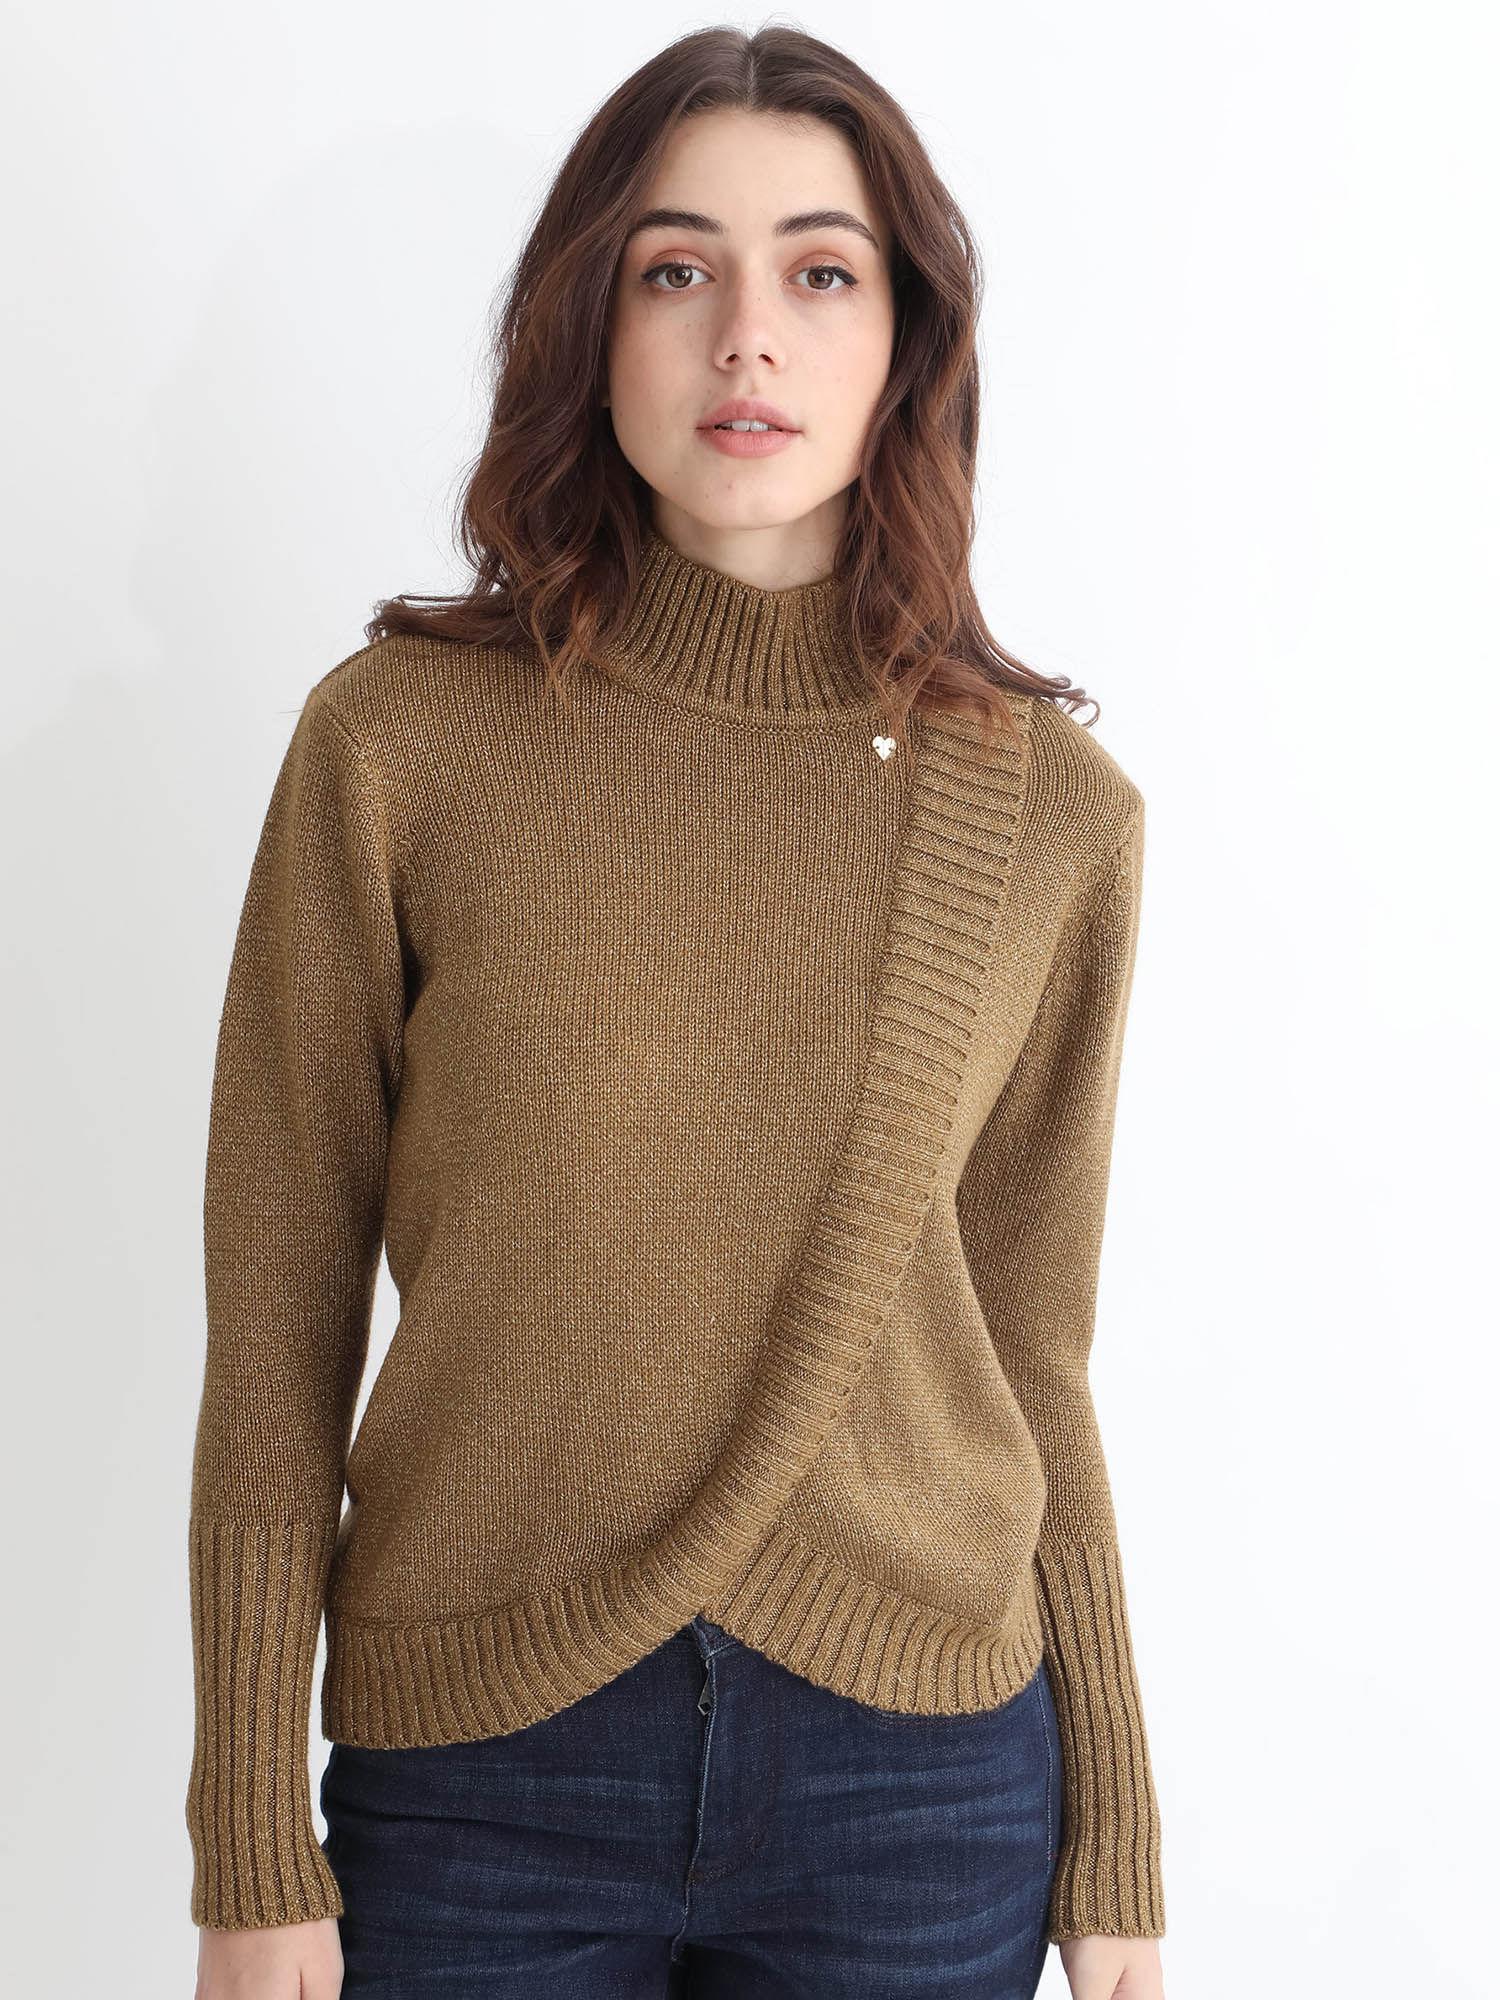 austern-primary-brown-solid-sweater